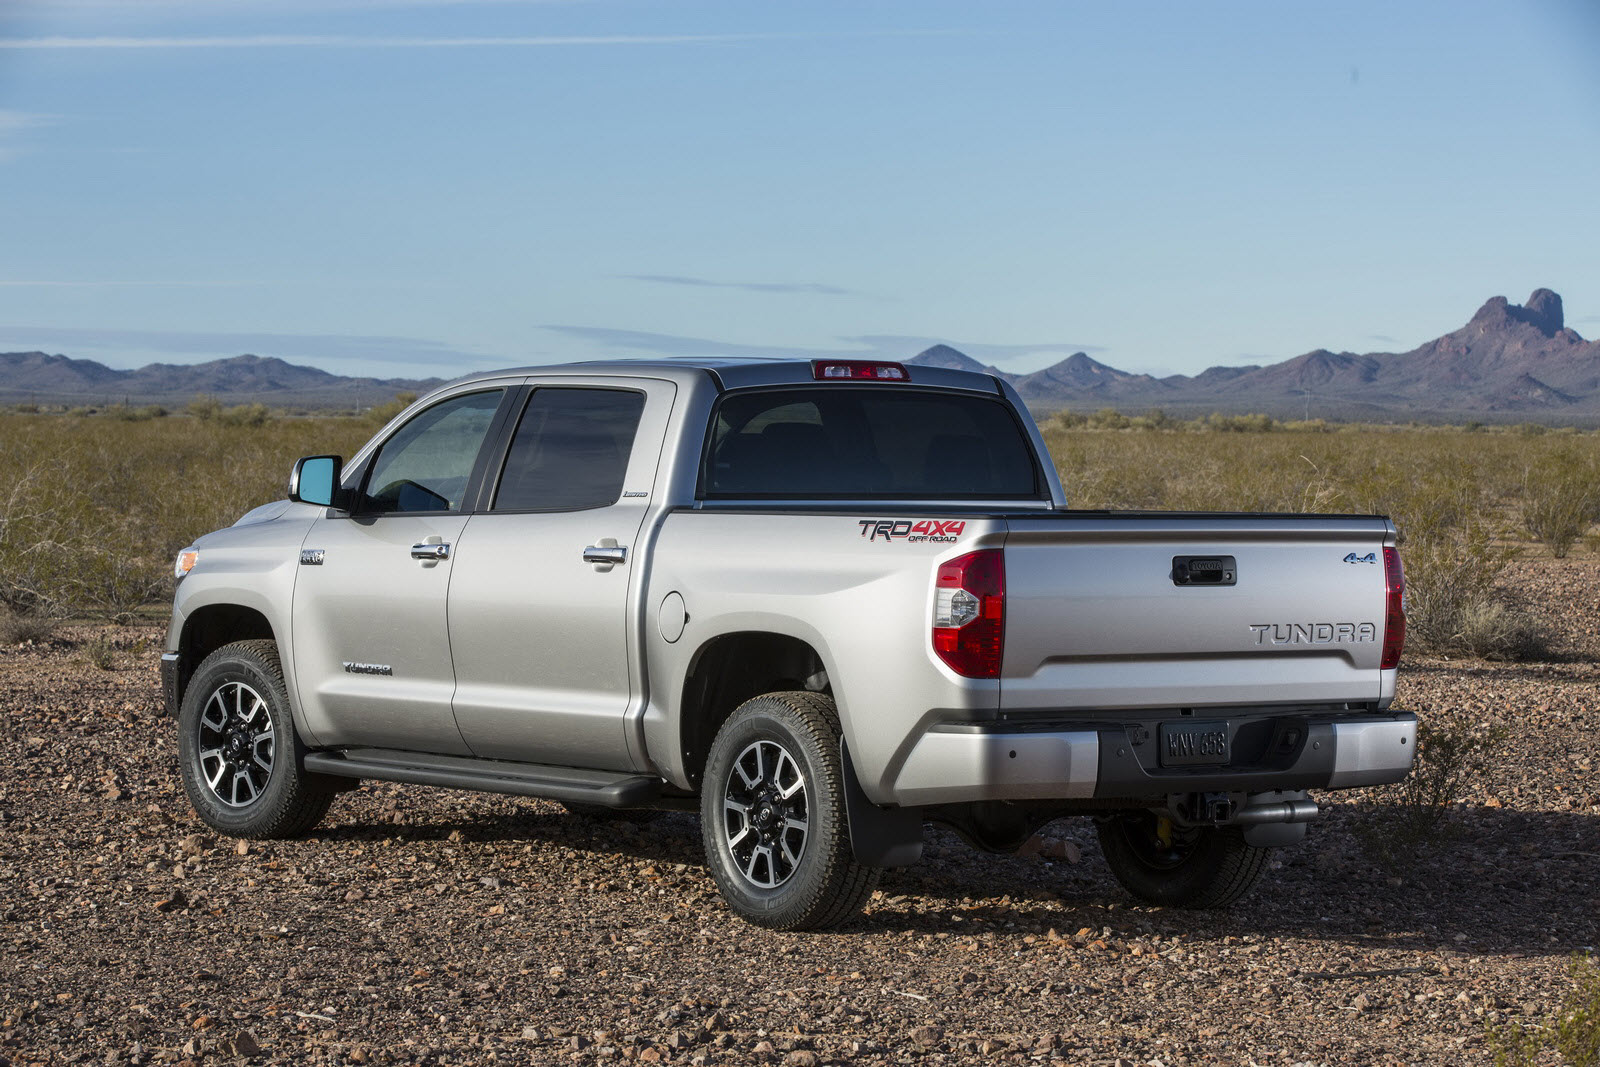 TOYOTA UNVEILS 2014 REDESIGNED TUNDRA FULL-SIZE PICKUP TRUCK | Auto Car